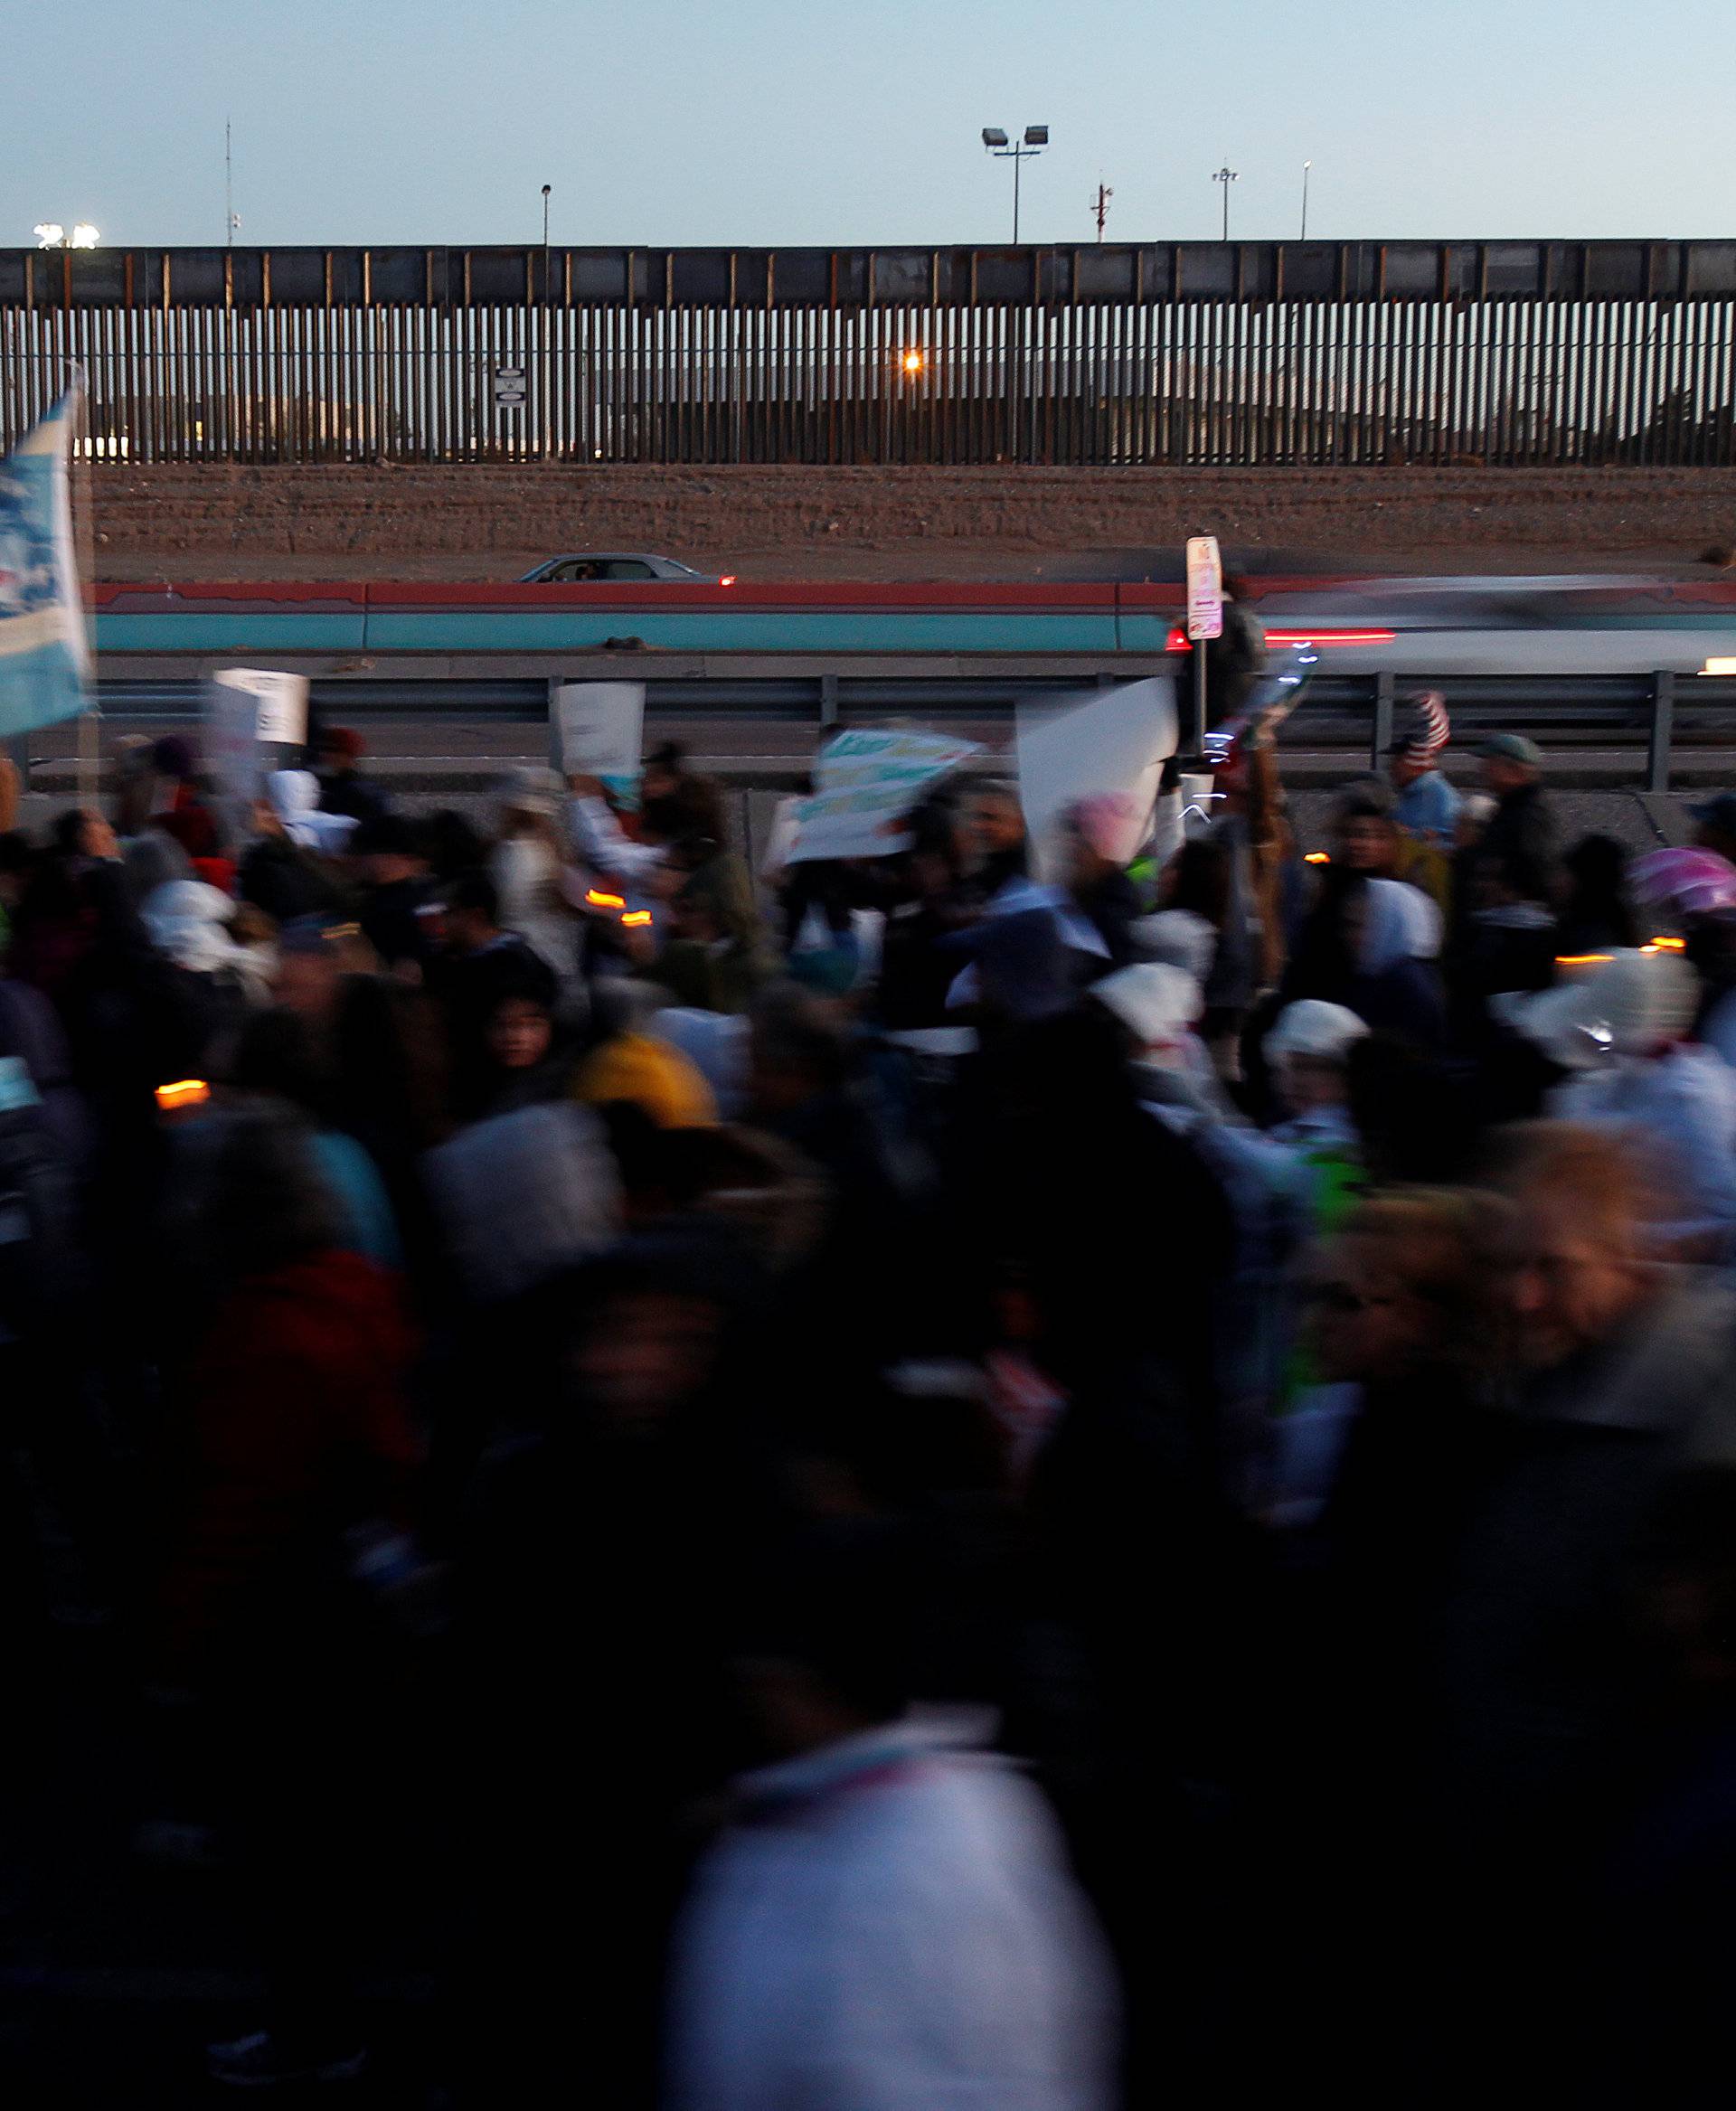 Demonstrators march along the border fence during the 'March for Truth: Stop the Wall, Stop the Lies' during the visit of U.S. President Trump to El Paso